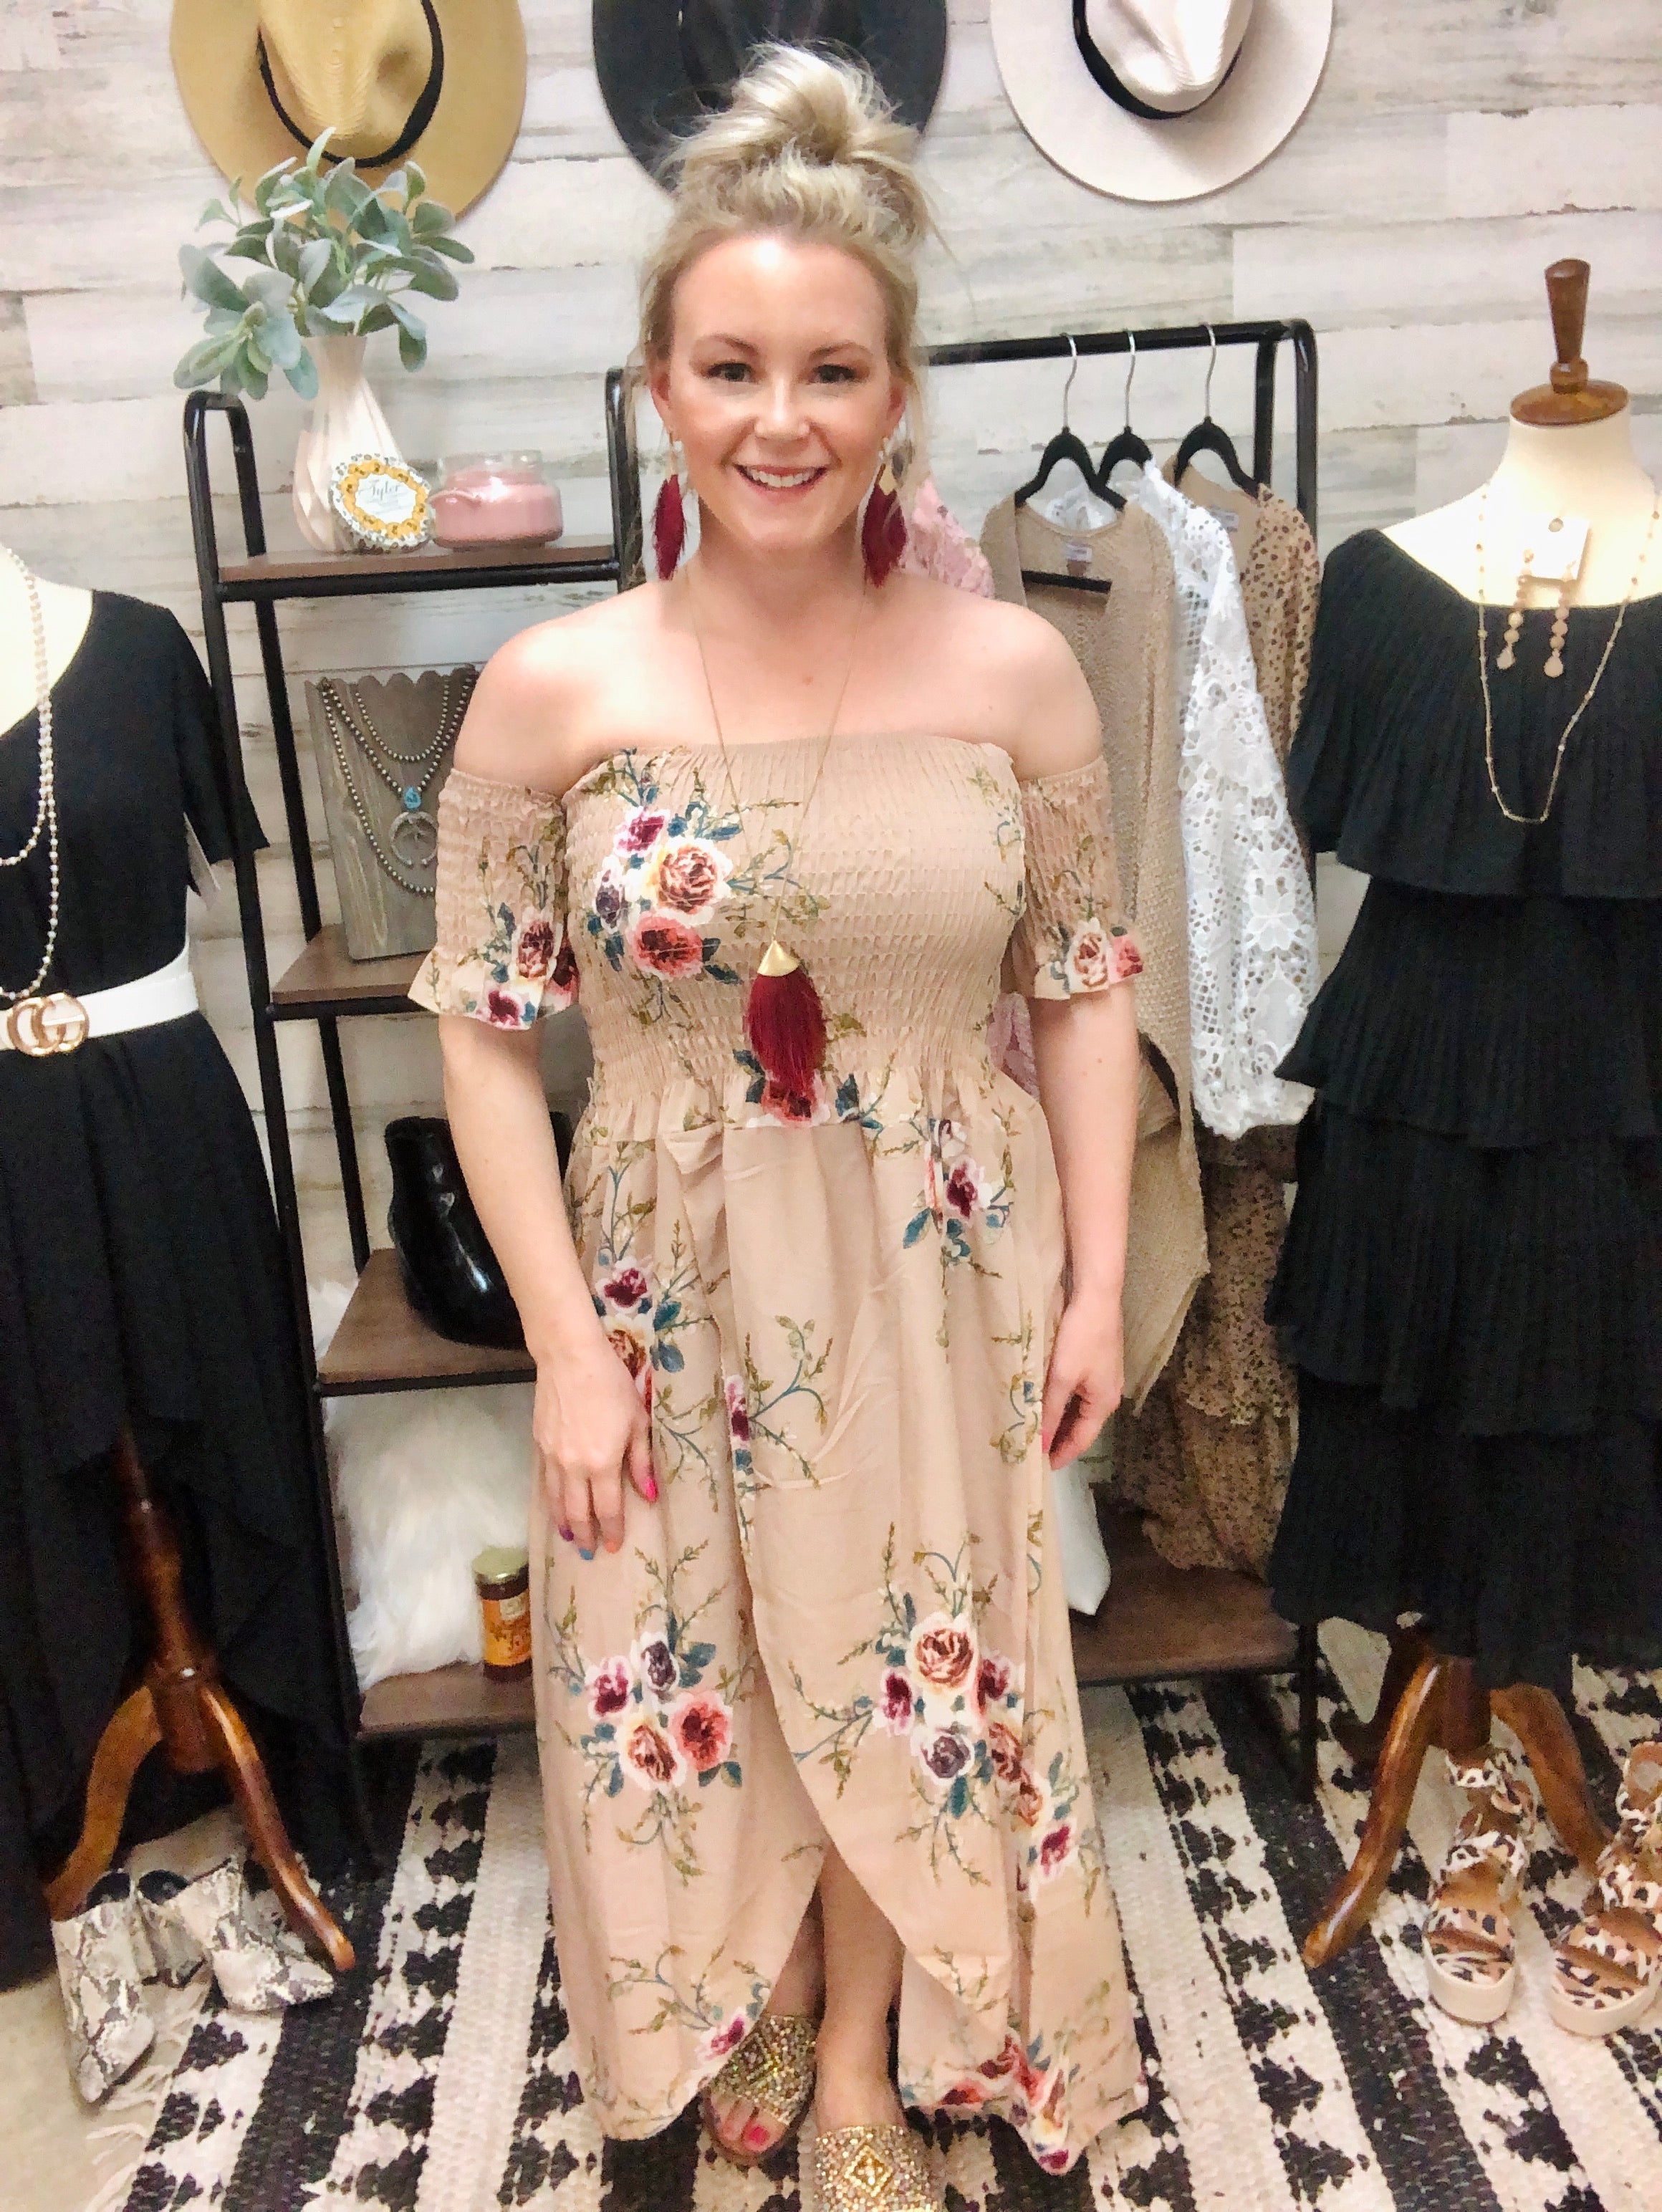 Last Chance Size Small | Boho Chic Smocked Floral Dress with Batwing Sleeves in Tan - Giddy Up Glamour Boutique